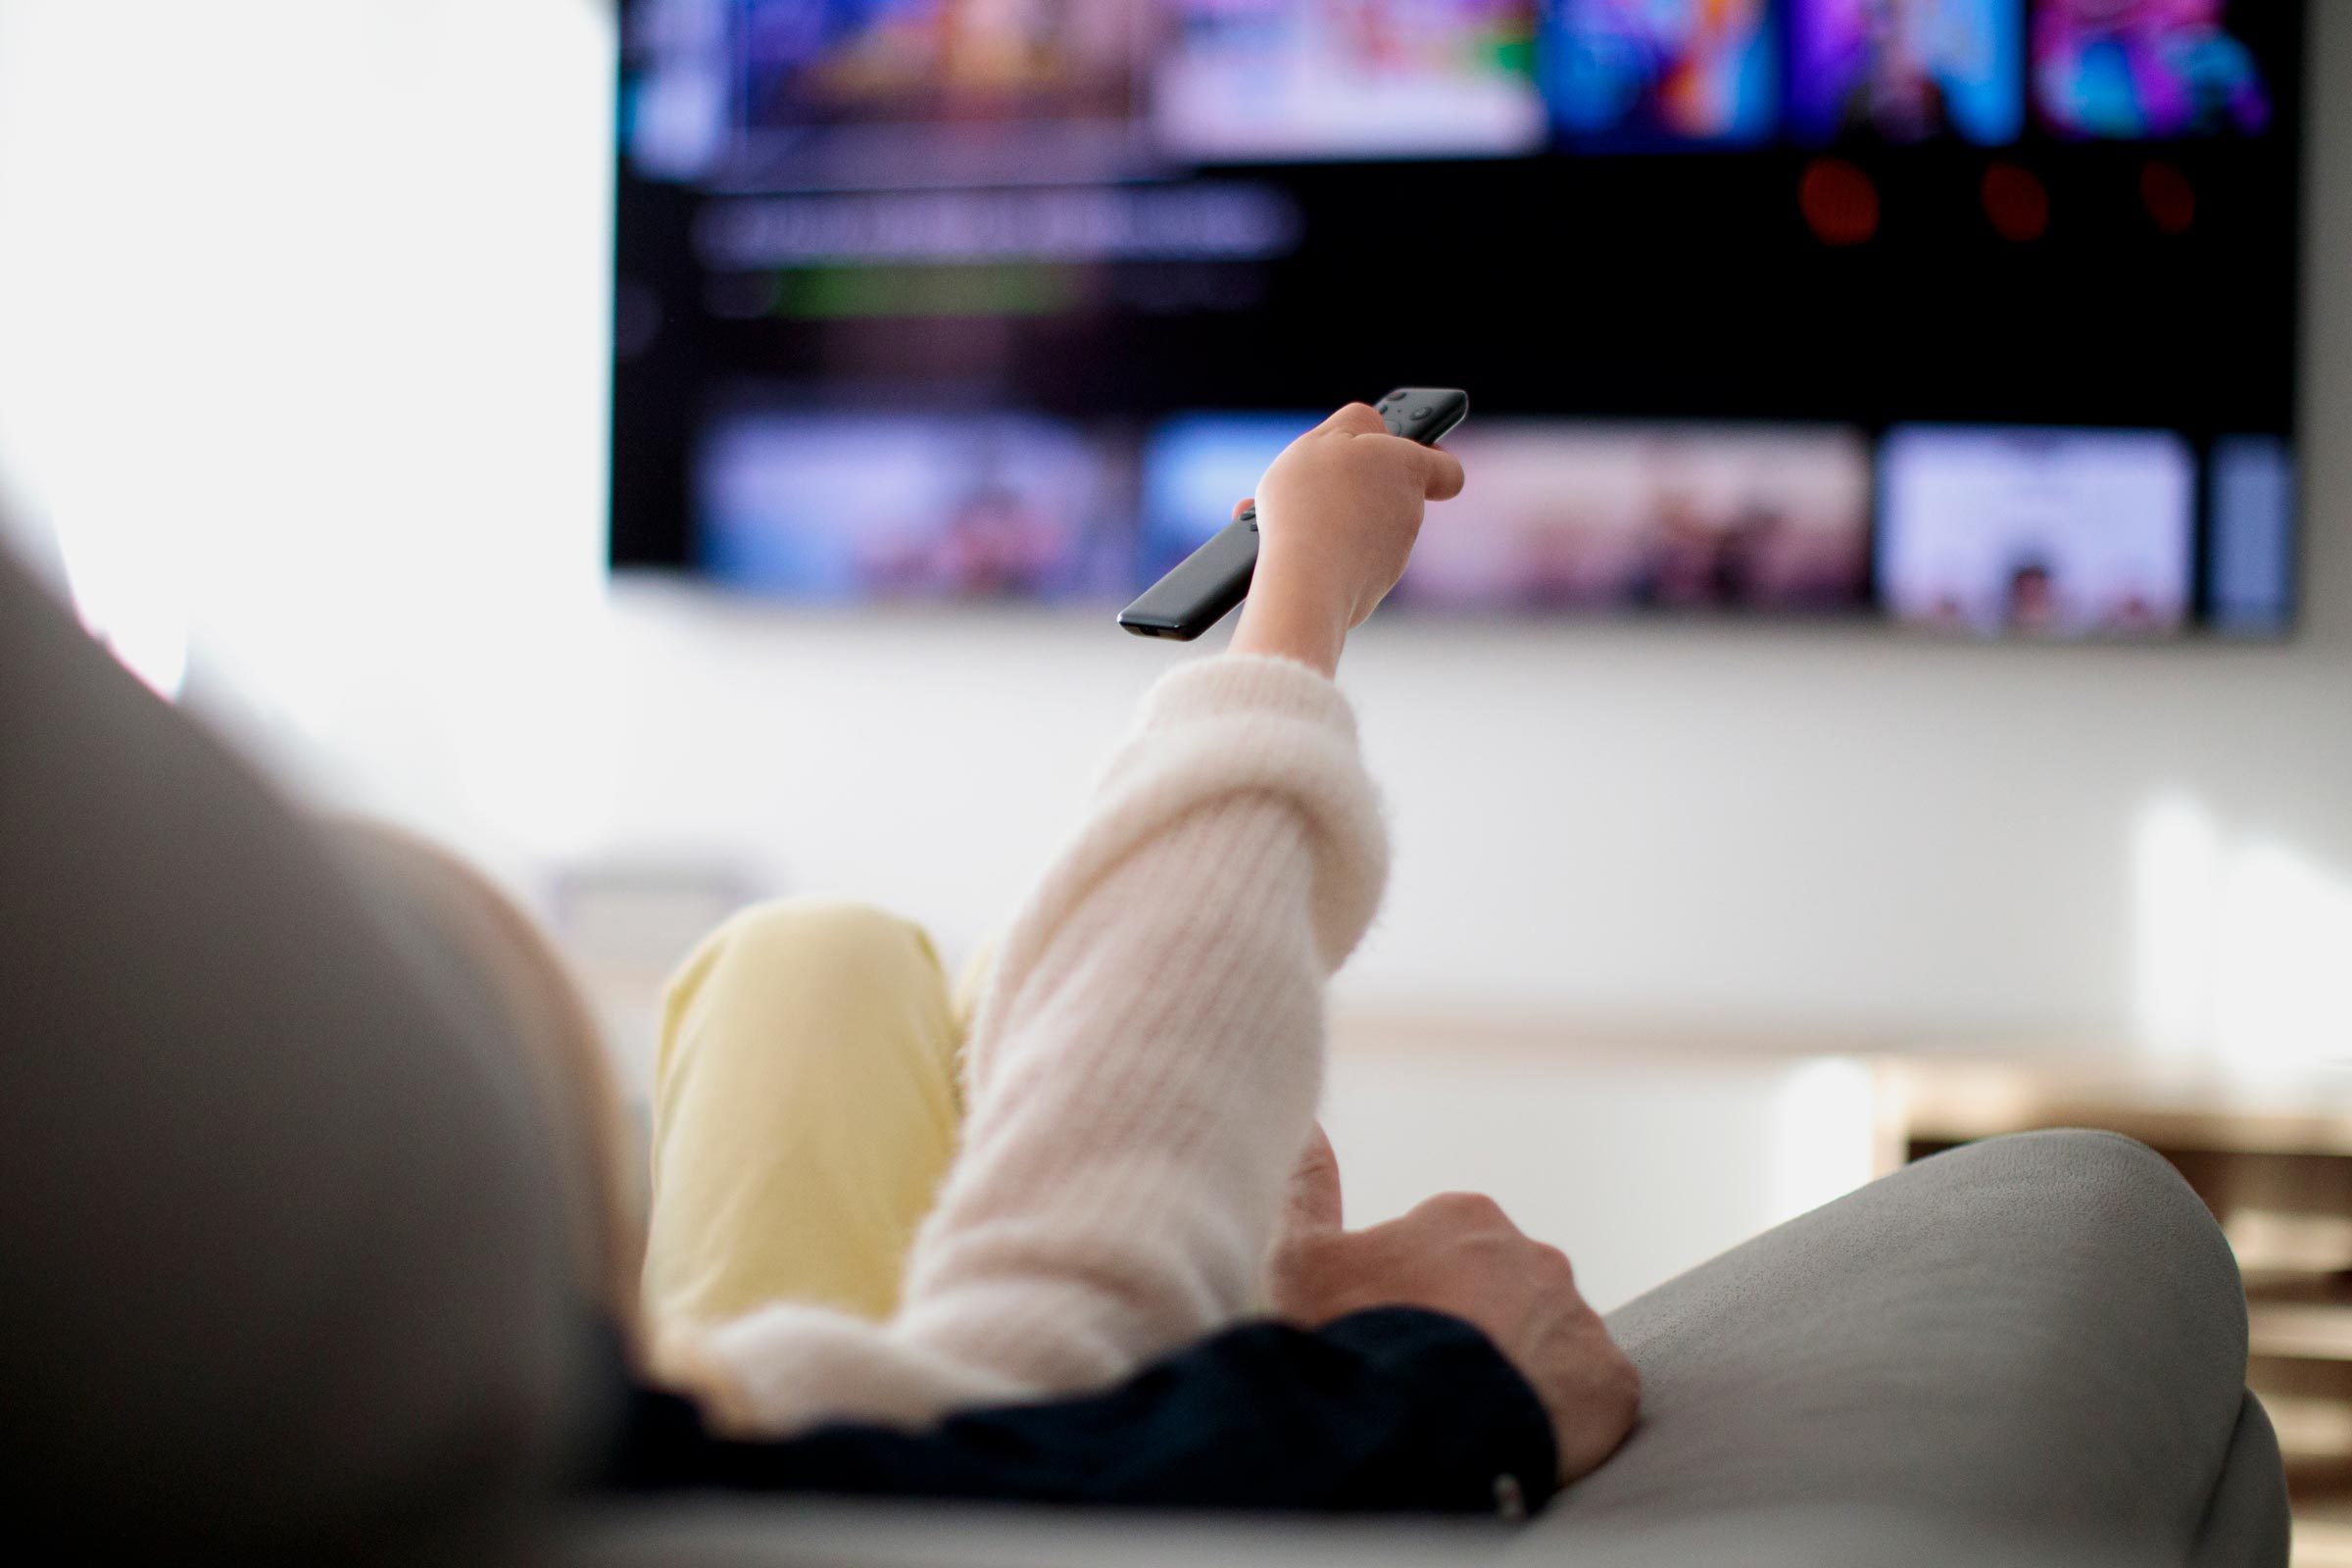 New 20-Year Study: Replacing TV with This Could Increase Your Odds of Aging Without Sickness by Almost 30%